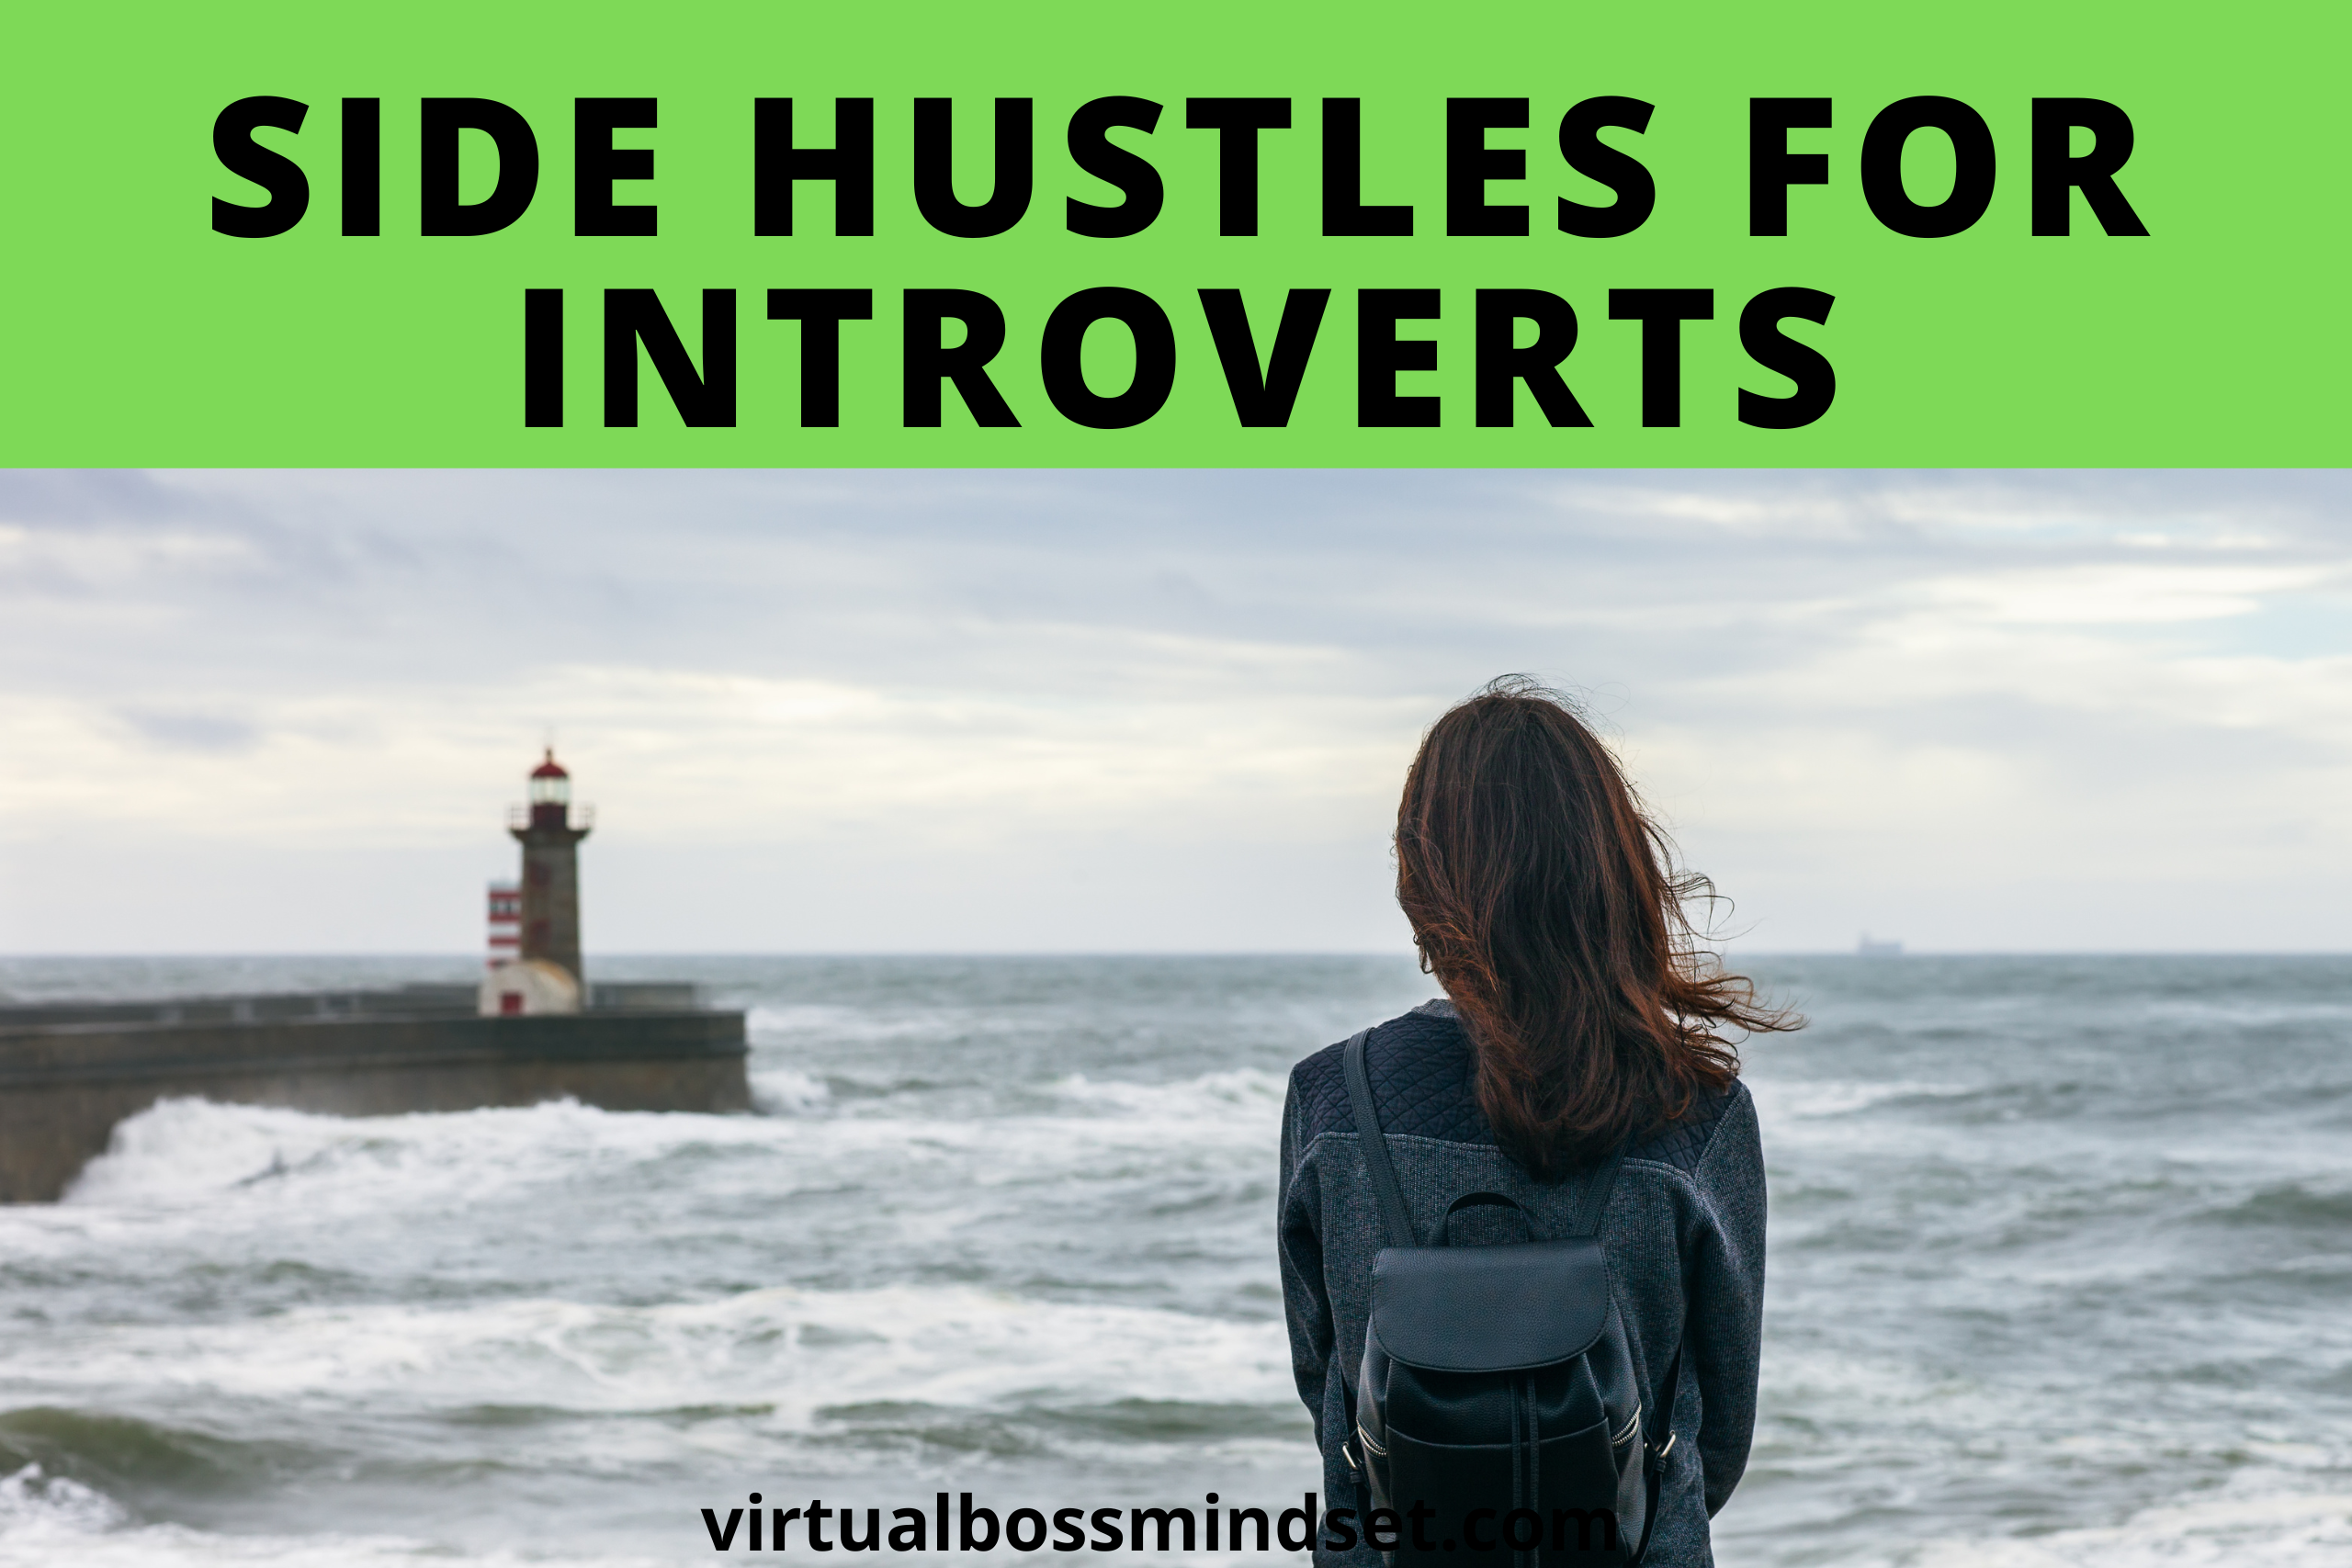 17 Best Side Hustles for Introverts To Make Money From Home